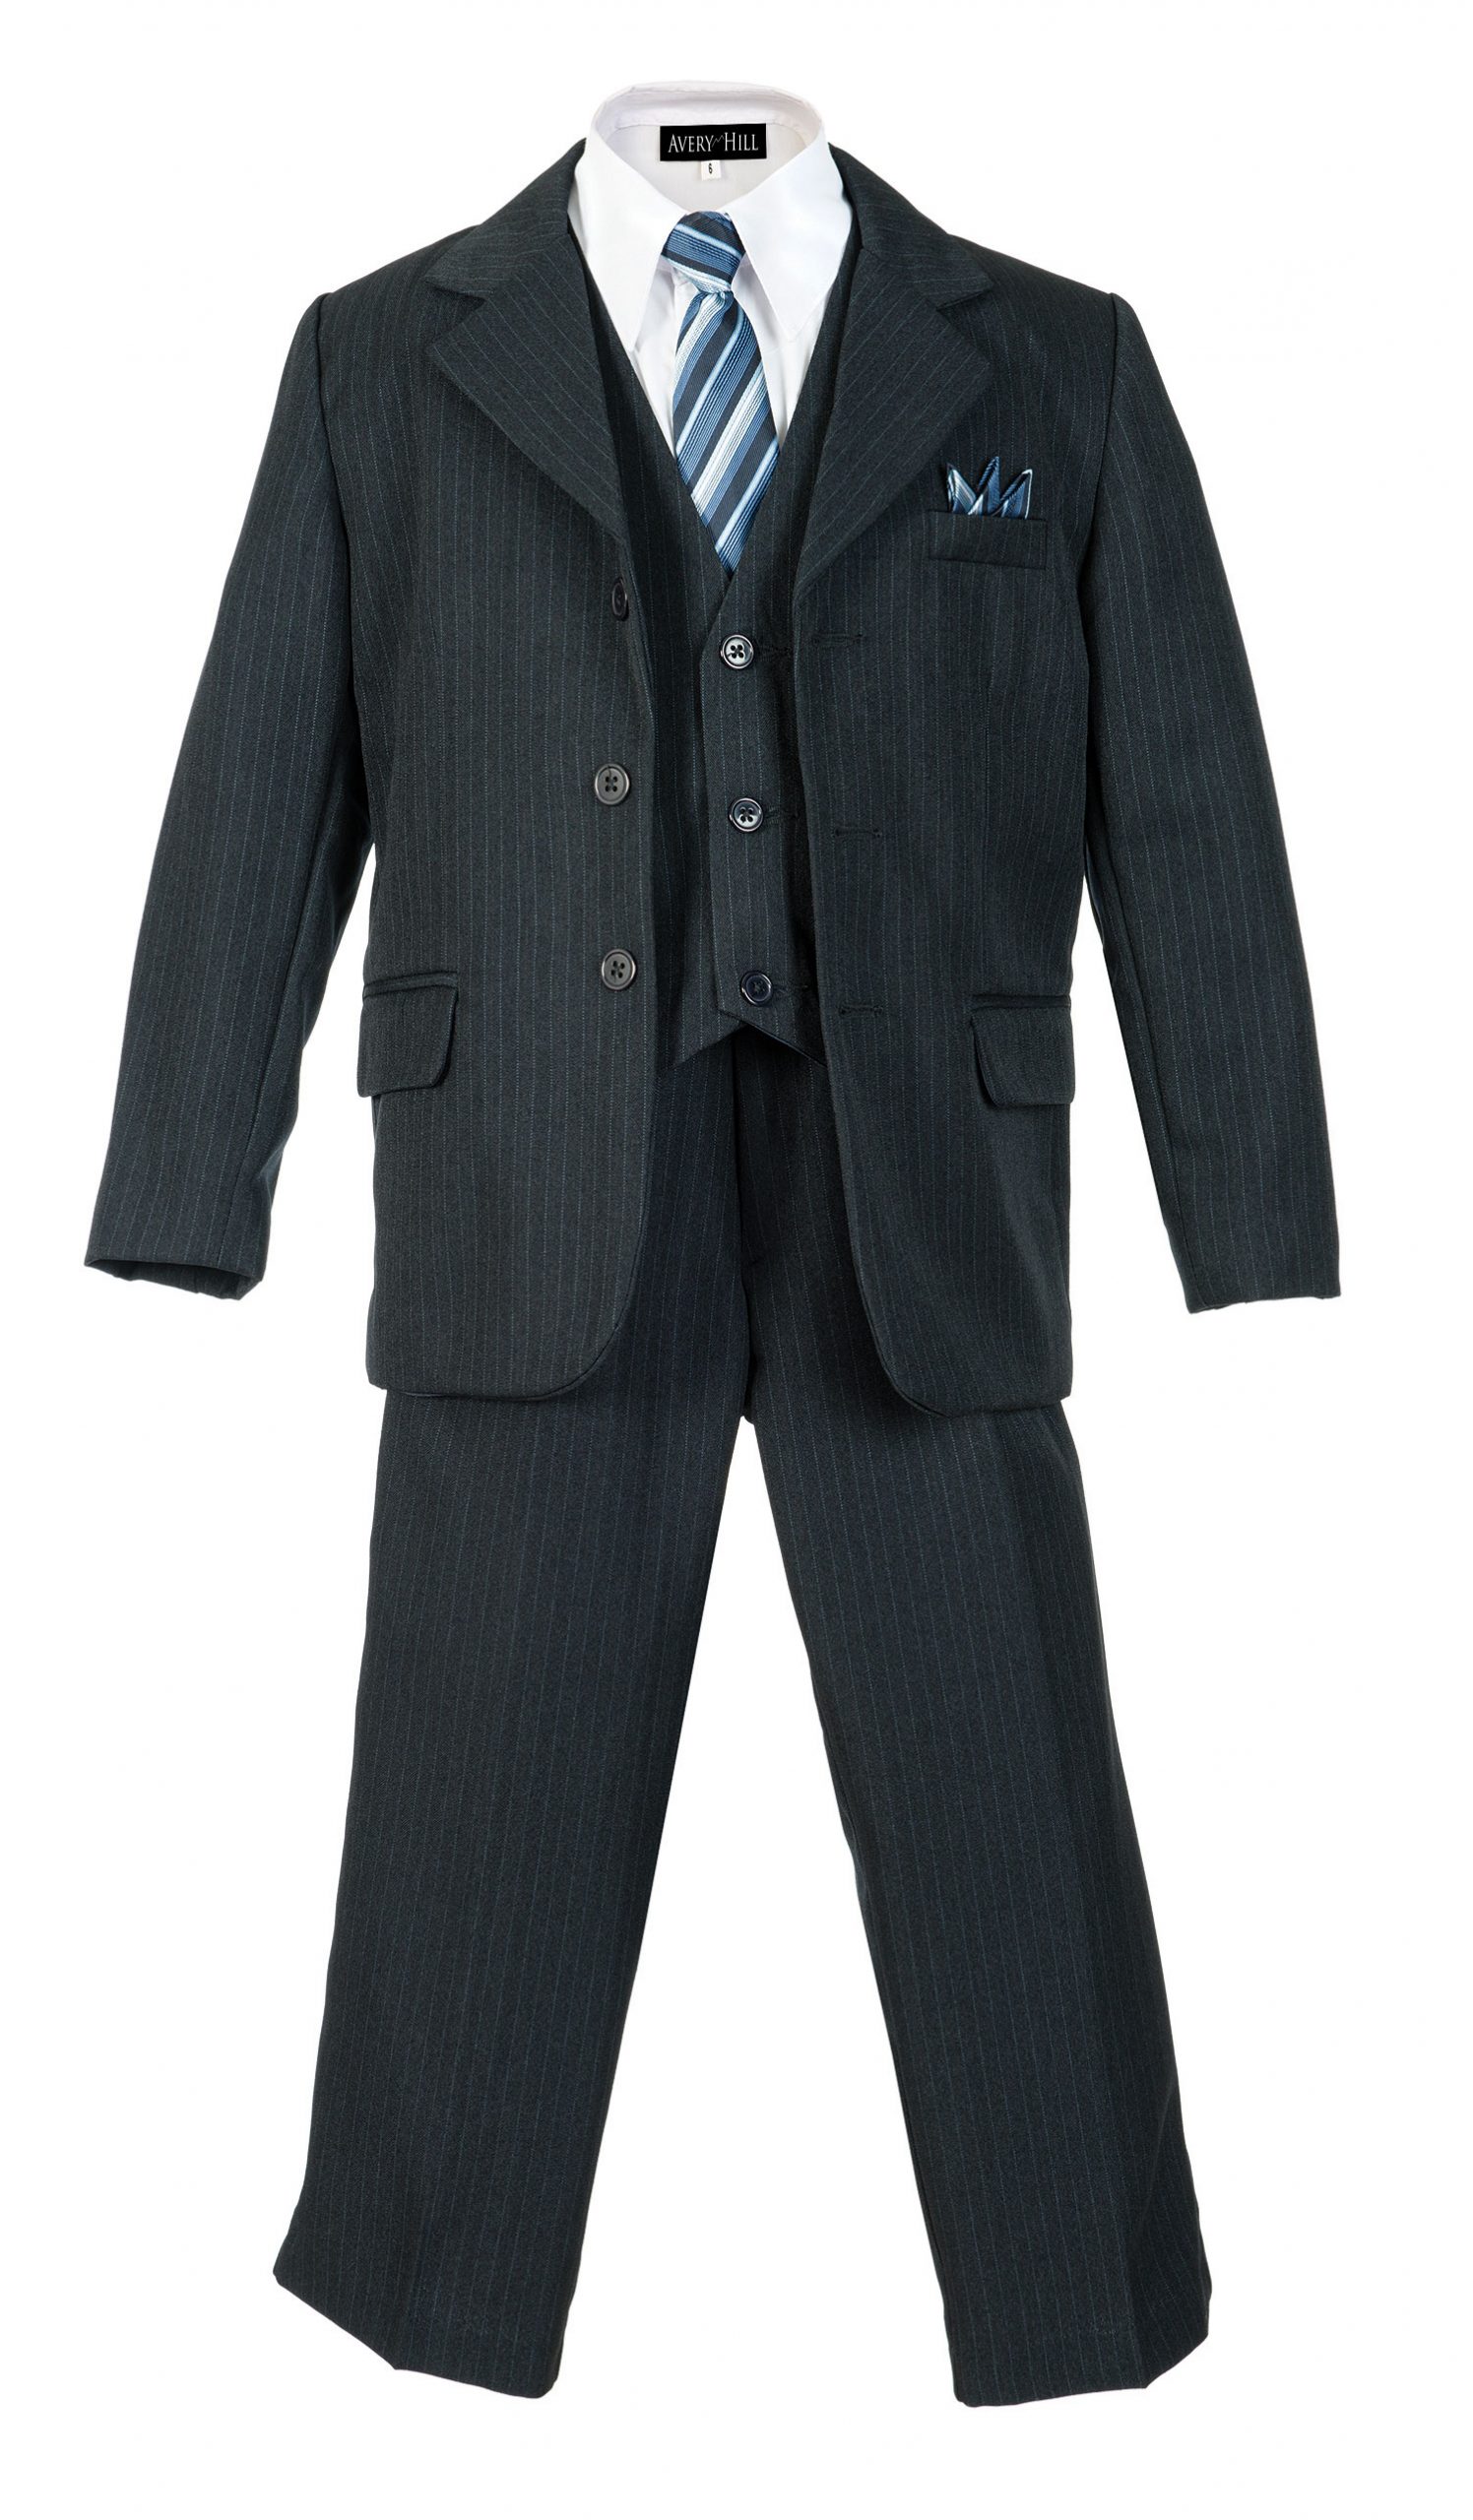 Boys Pinstripe Suit Set with Matching Tie NB 2T